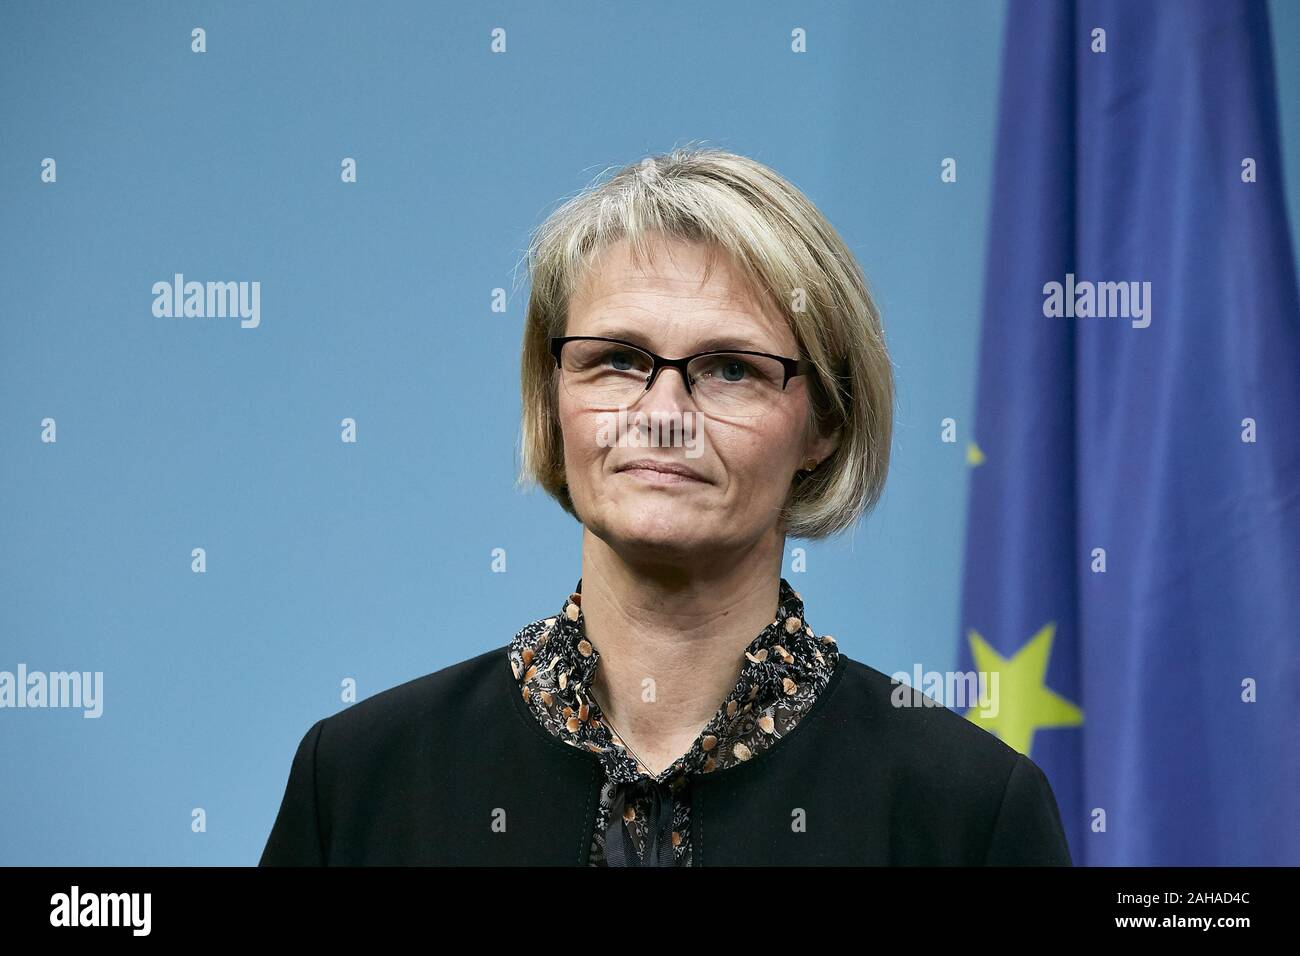 13.11.2019, Berlin, Berlin, Germany - Anja Karliczek, Federal Minister for Education and Research. The Minister made a press statement on the expansio Stock Photo